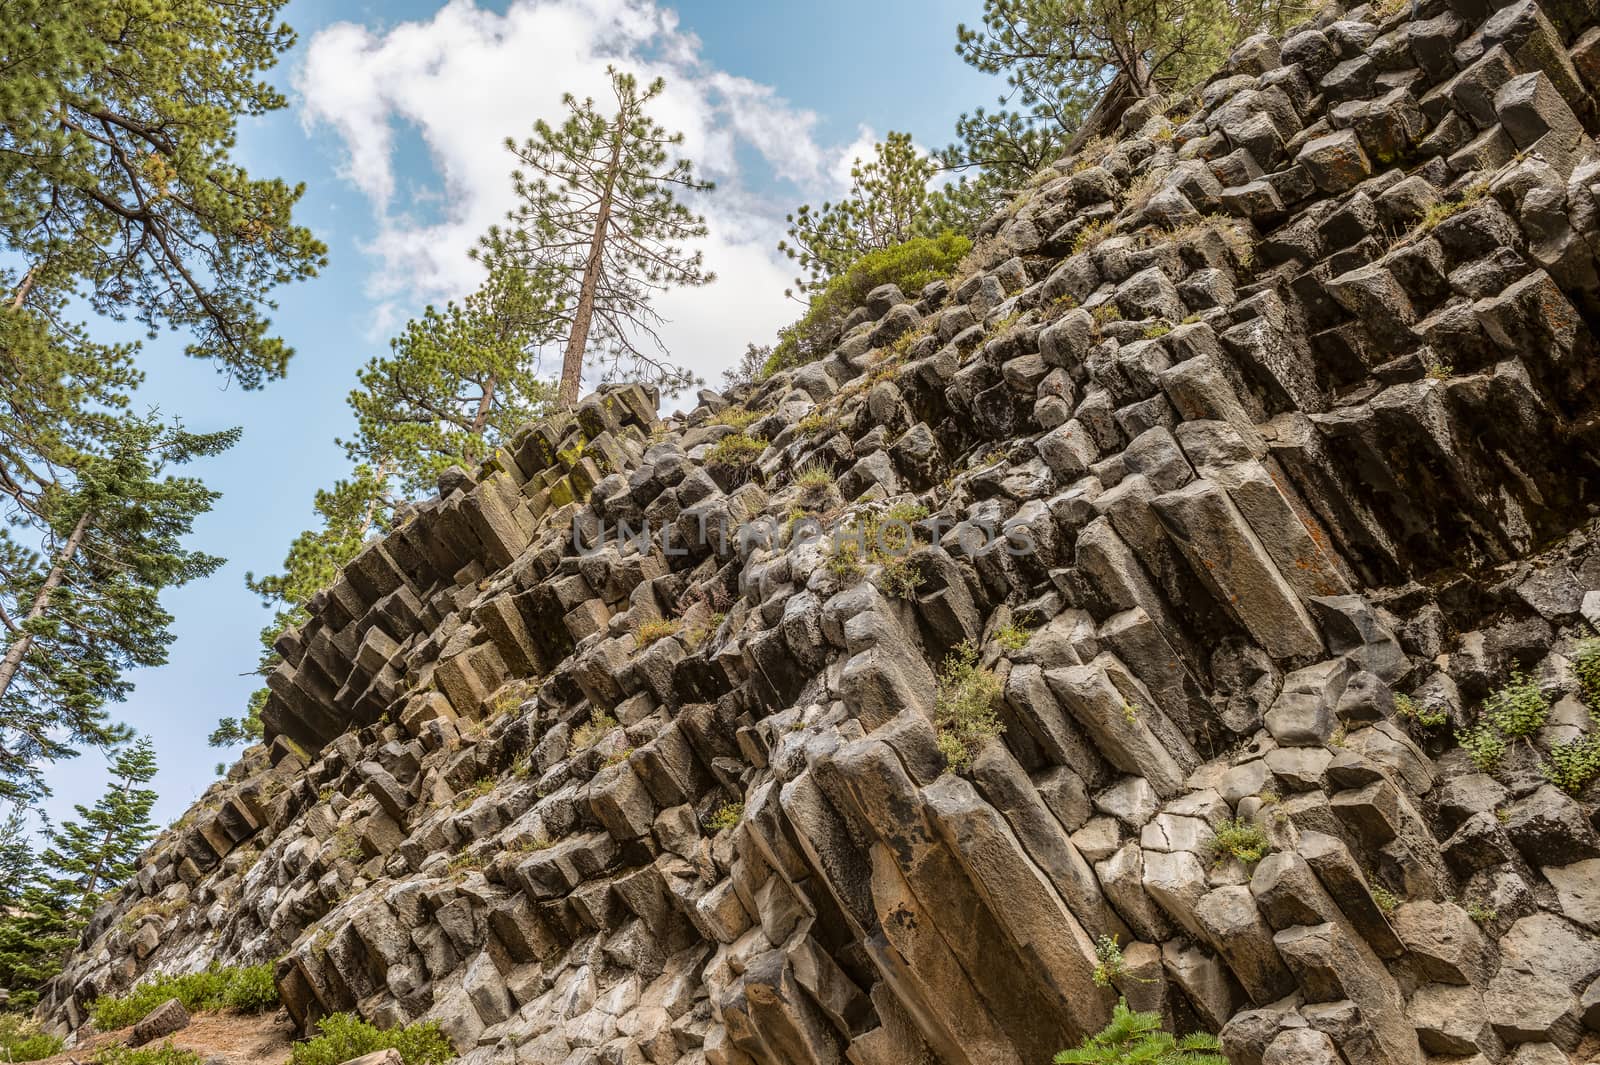 Hexagon basaltic columns of Devils Postpile National Monument in Inyo National Forest, Ansel Adams Wilderness by Njean